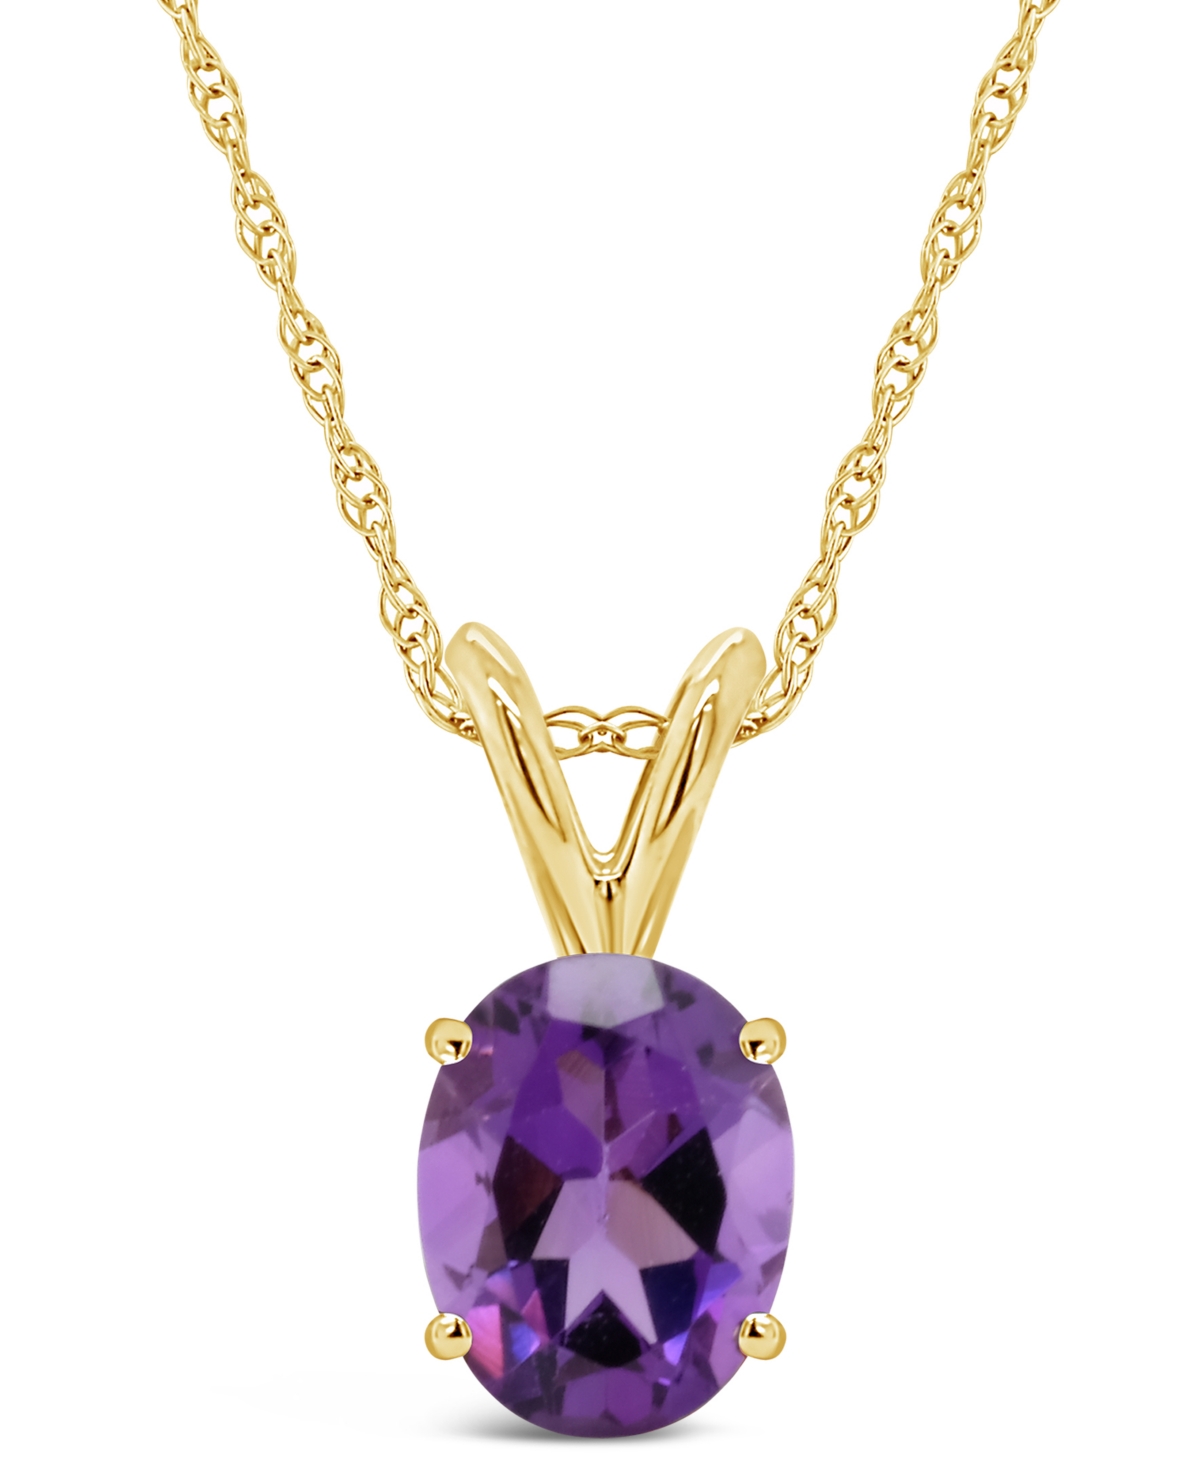 MACY'S AMETHYST PENDANT NECKLACE (1-1/5 CT.T.W) IN 14K YELLOW GOLD